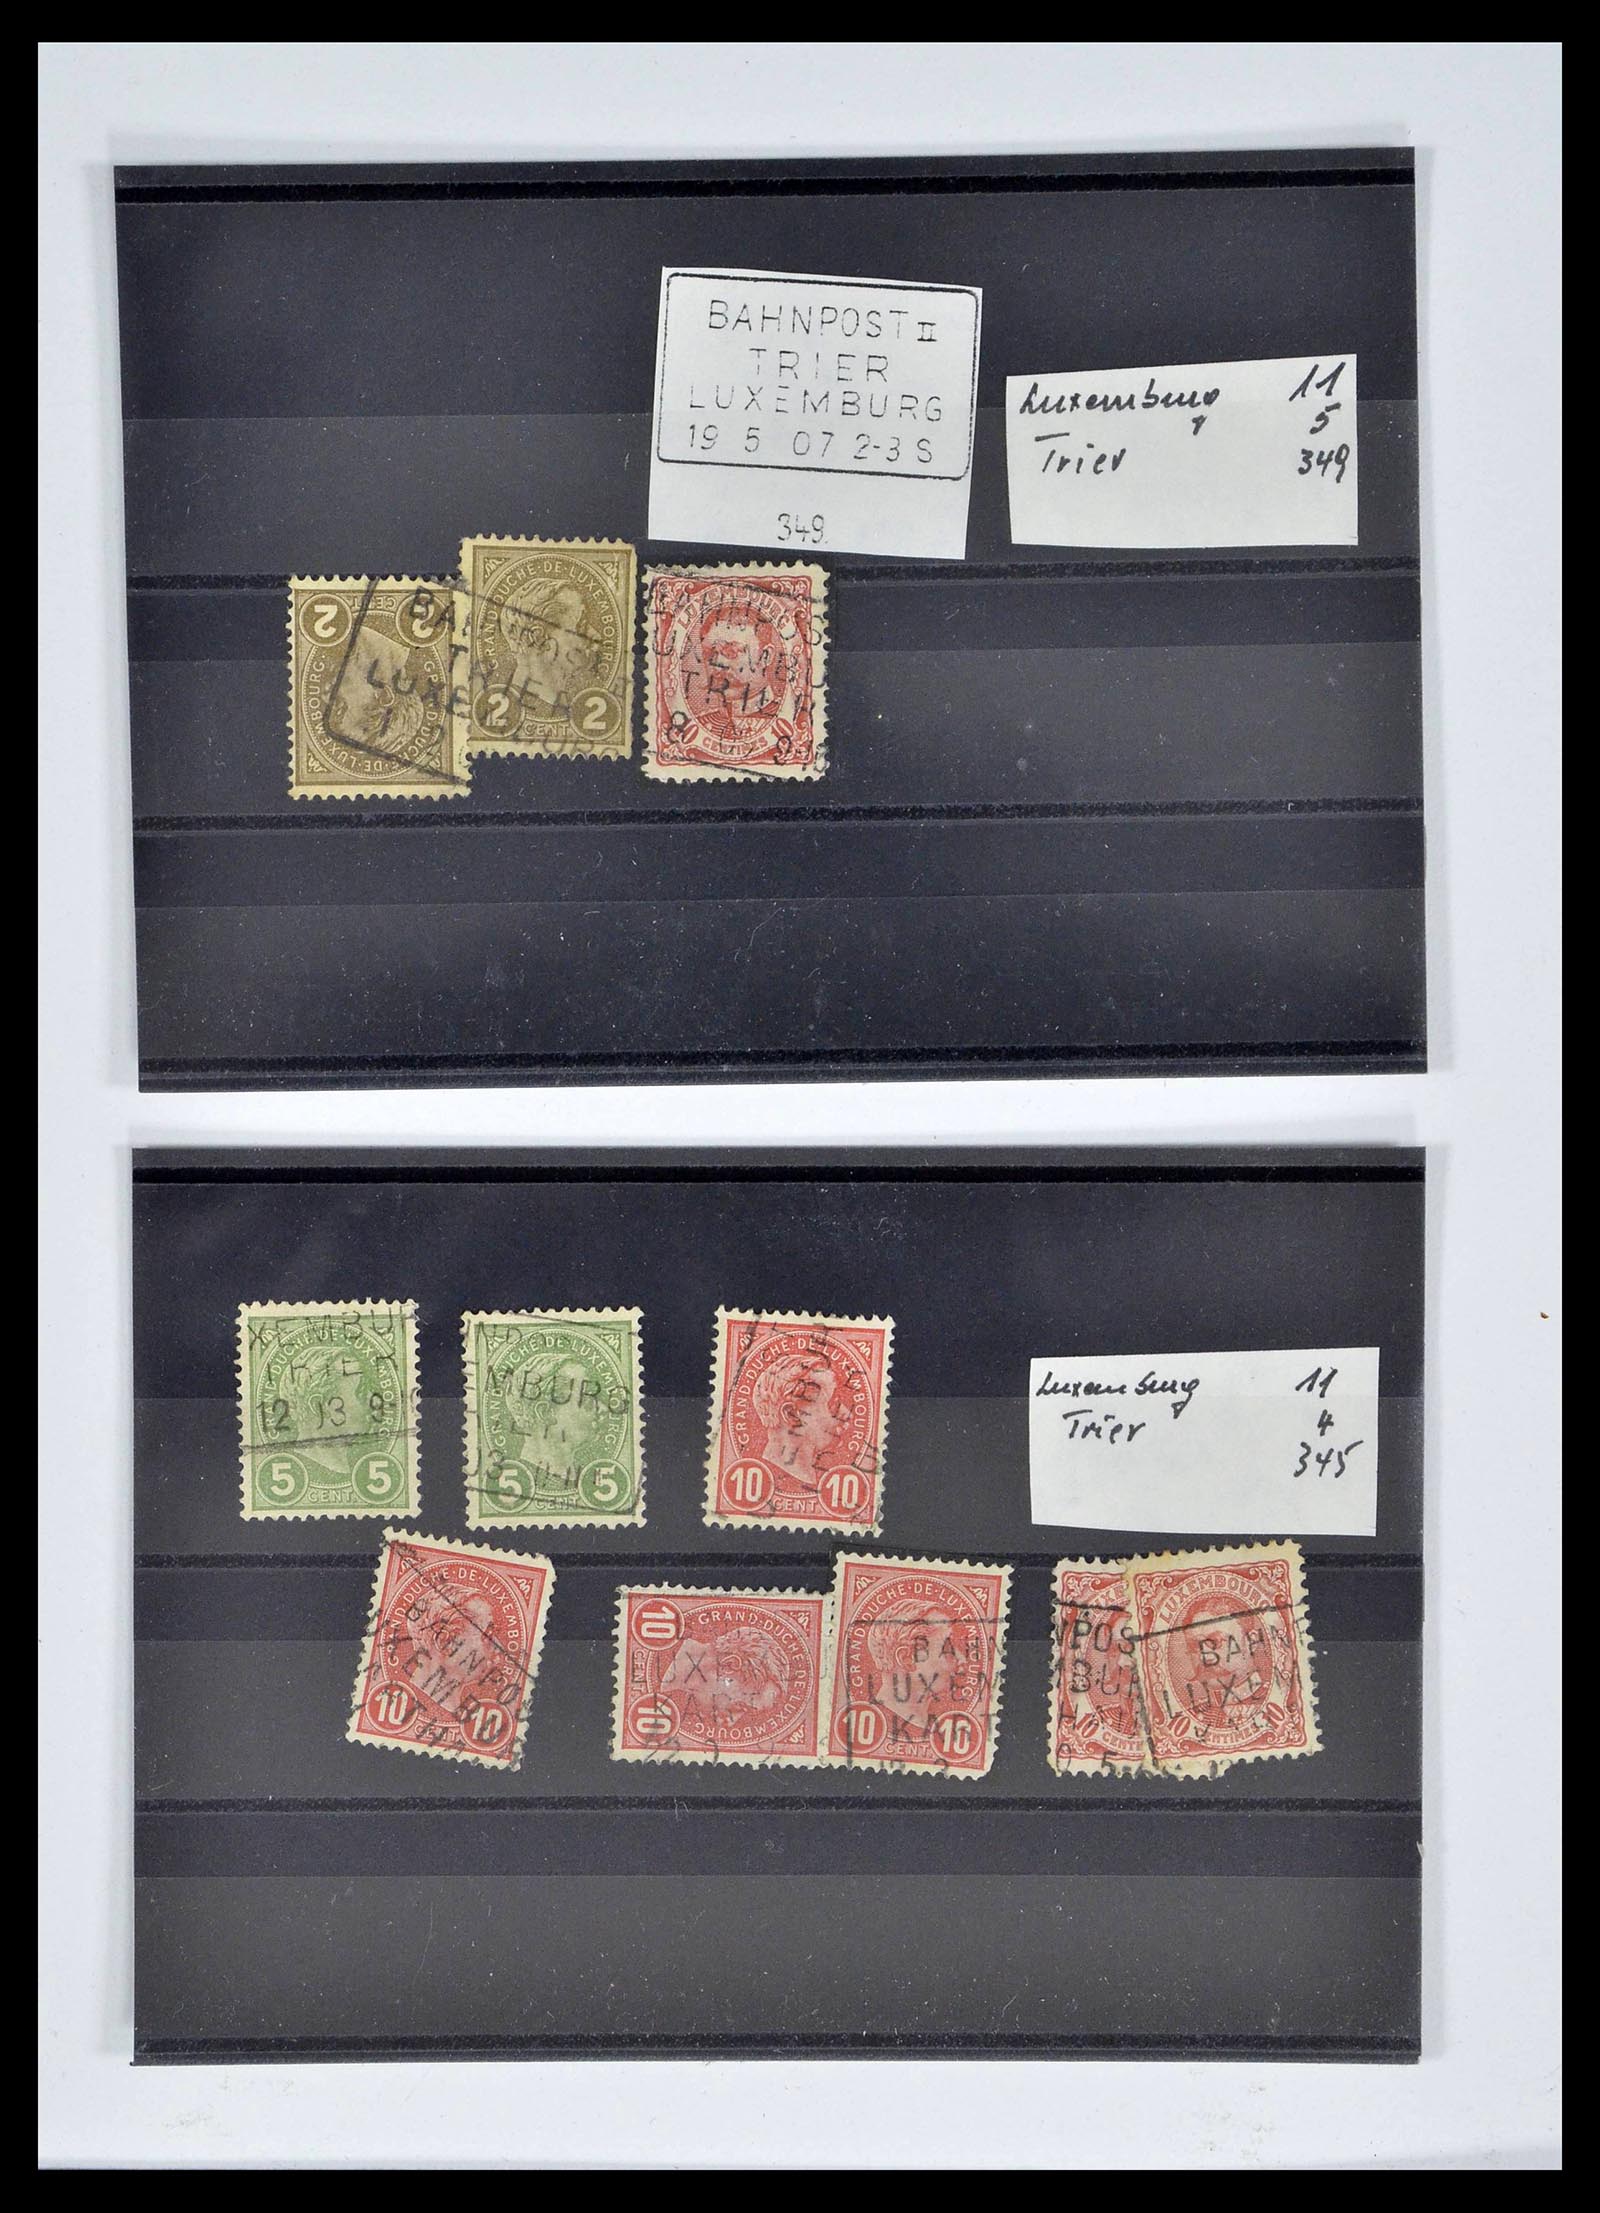 38876 0100 - Stamp collection 38876 Luxembourg train cancels 1890-1950.